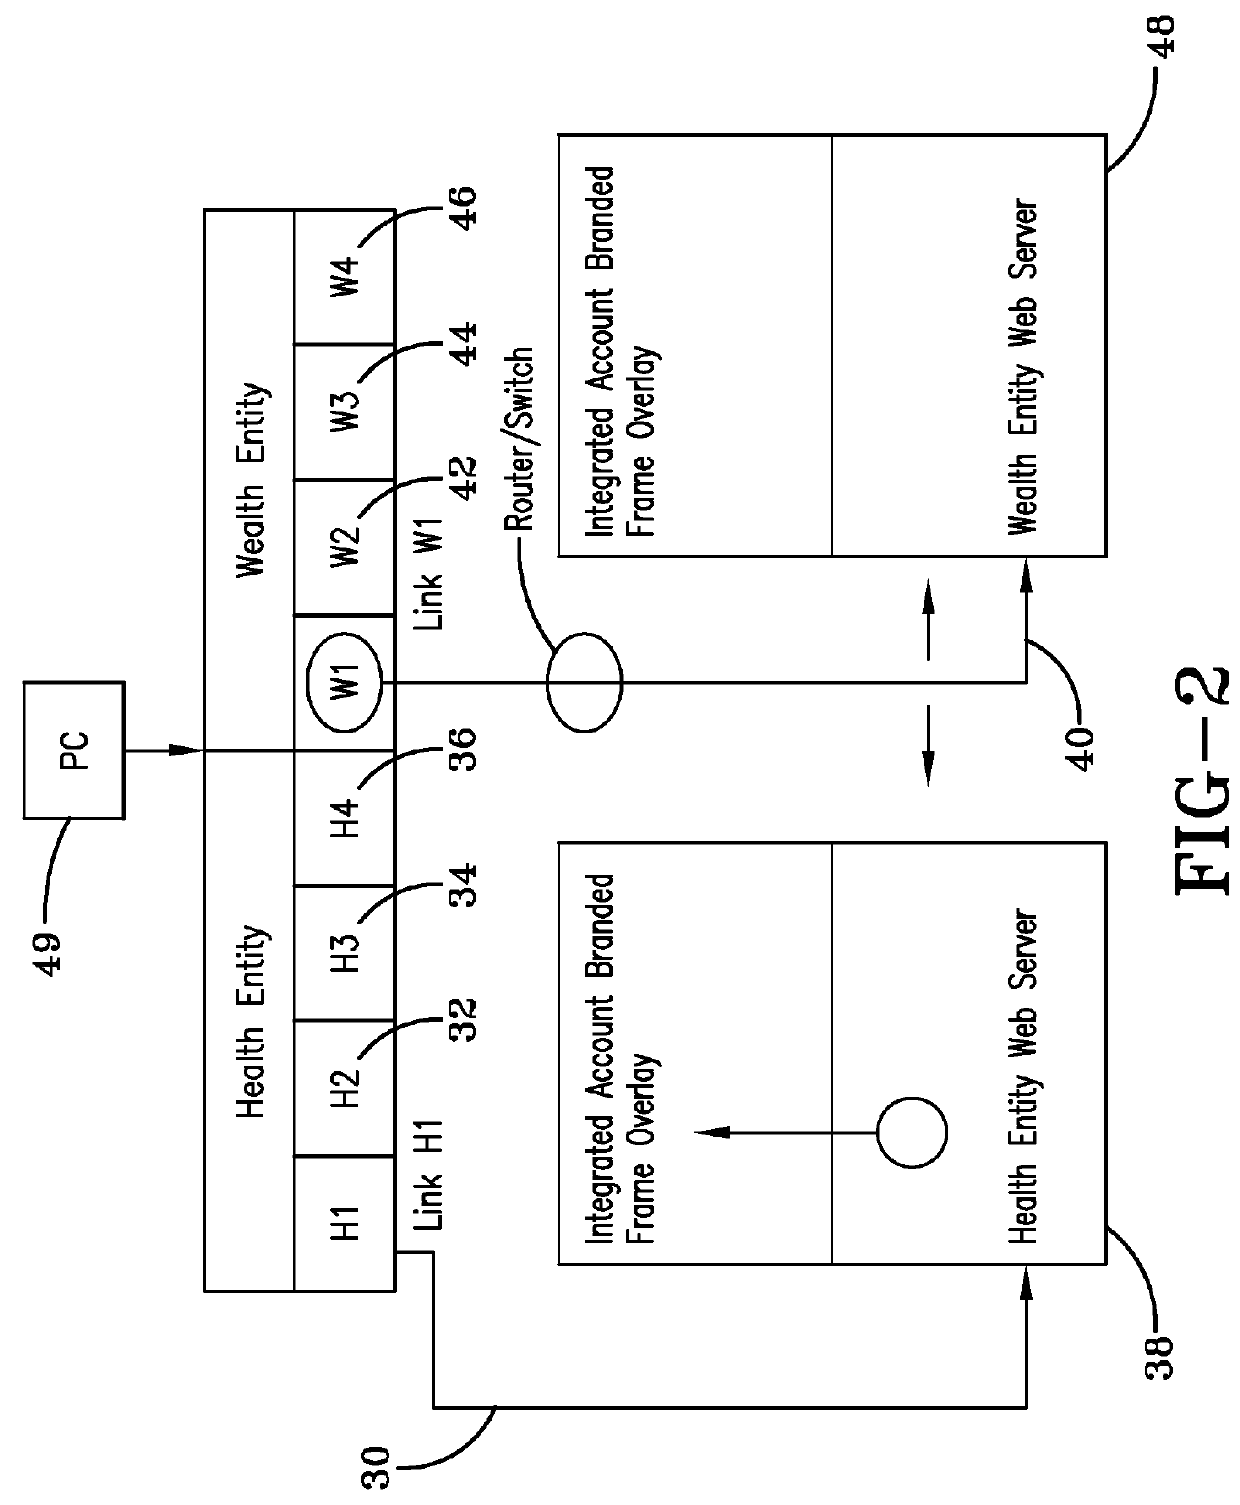 Integrated health and wealth account system and method